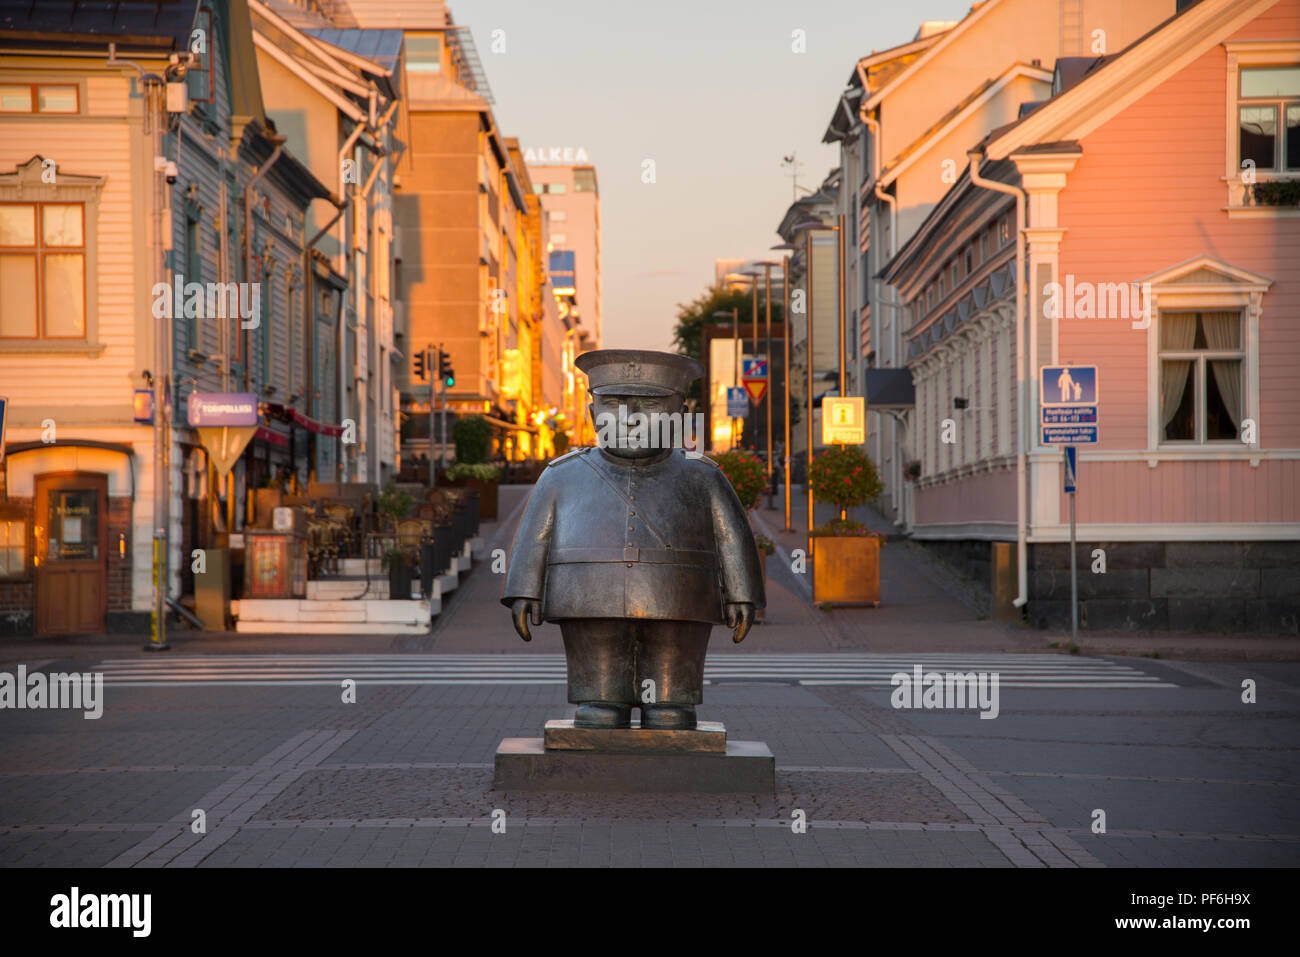 The Bobby at the Market Place (Toripoliisi), Oulu, Finland Stock Photo